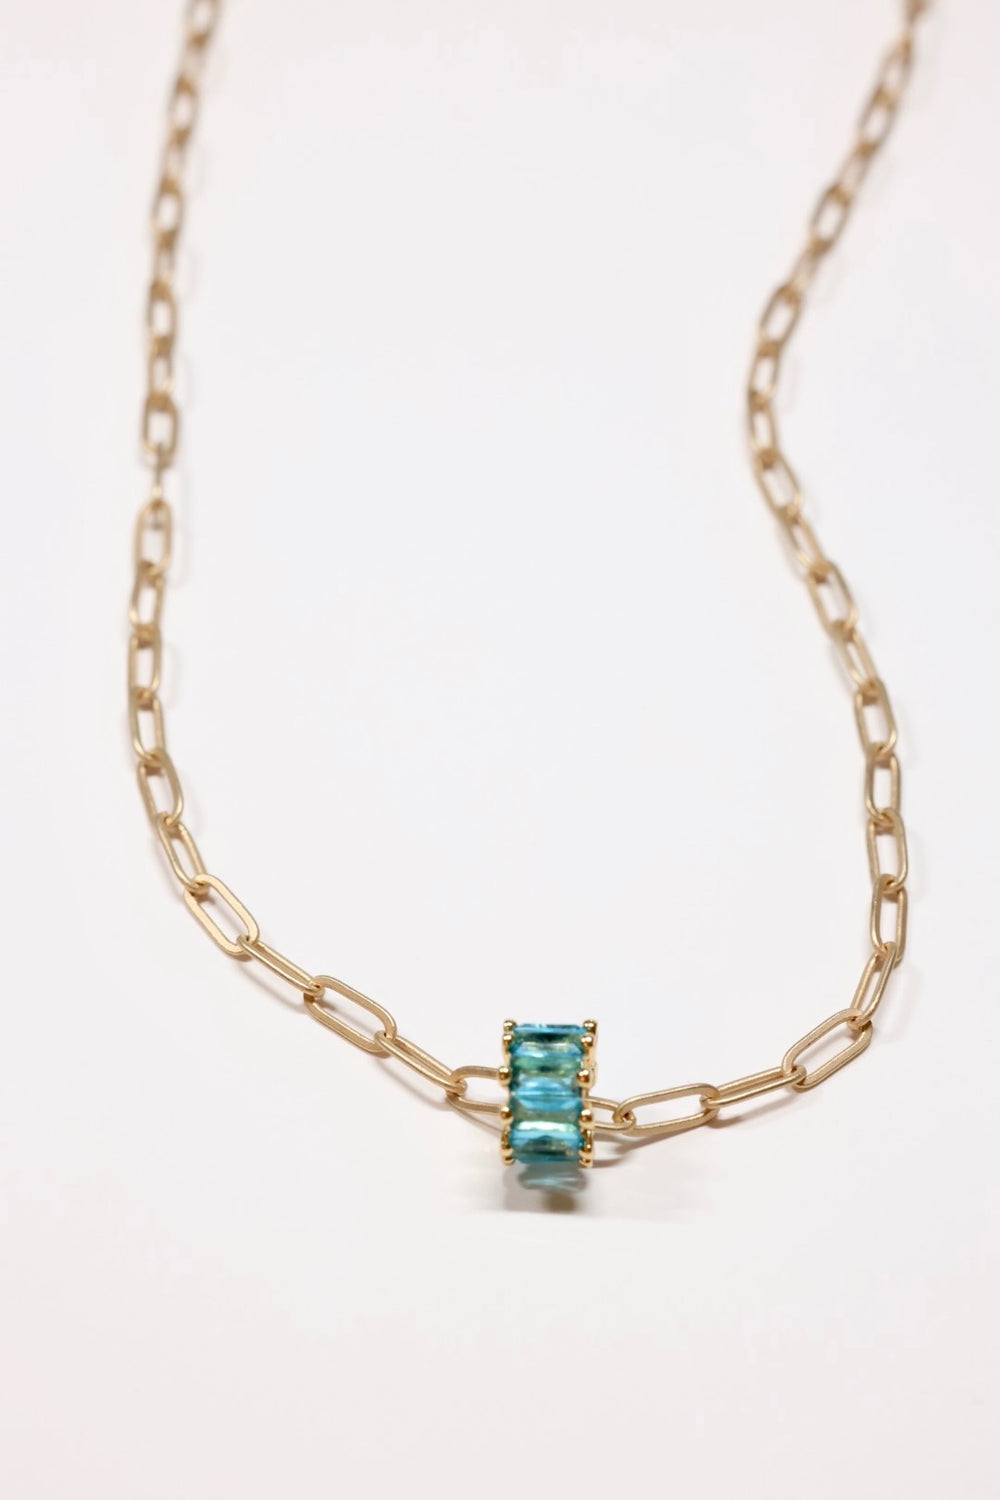 Aqua Crystal rondel necklace in gold on flat lay 